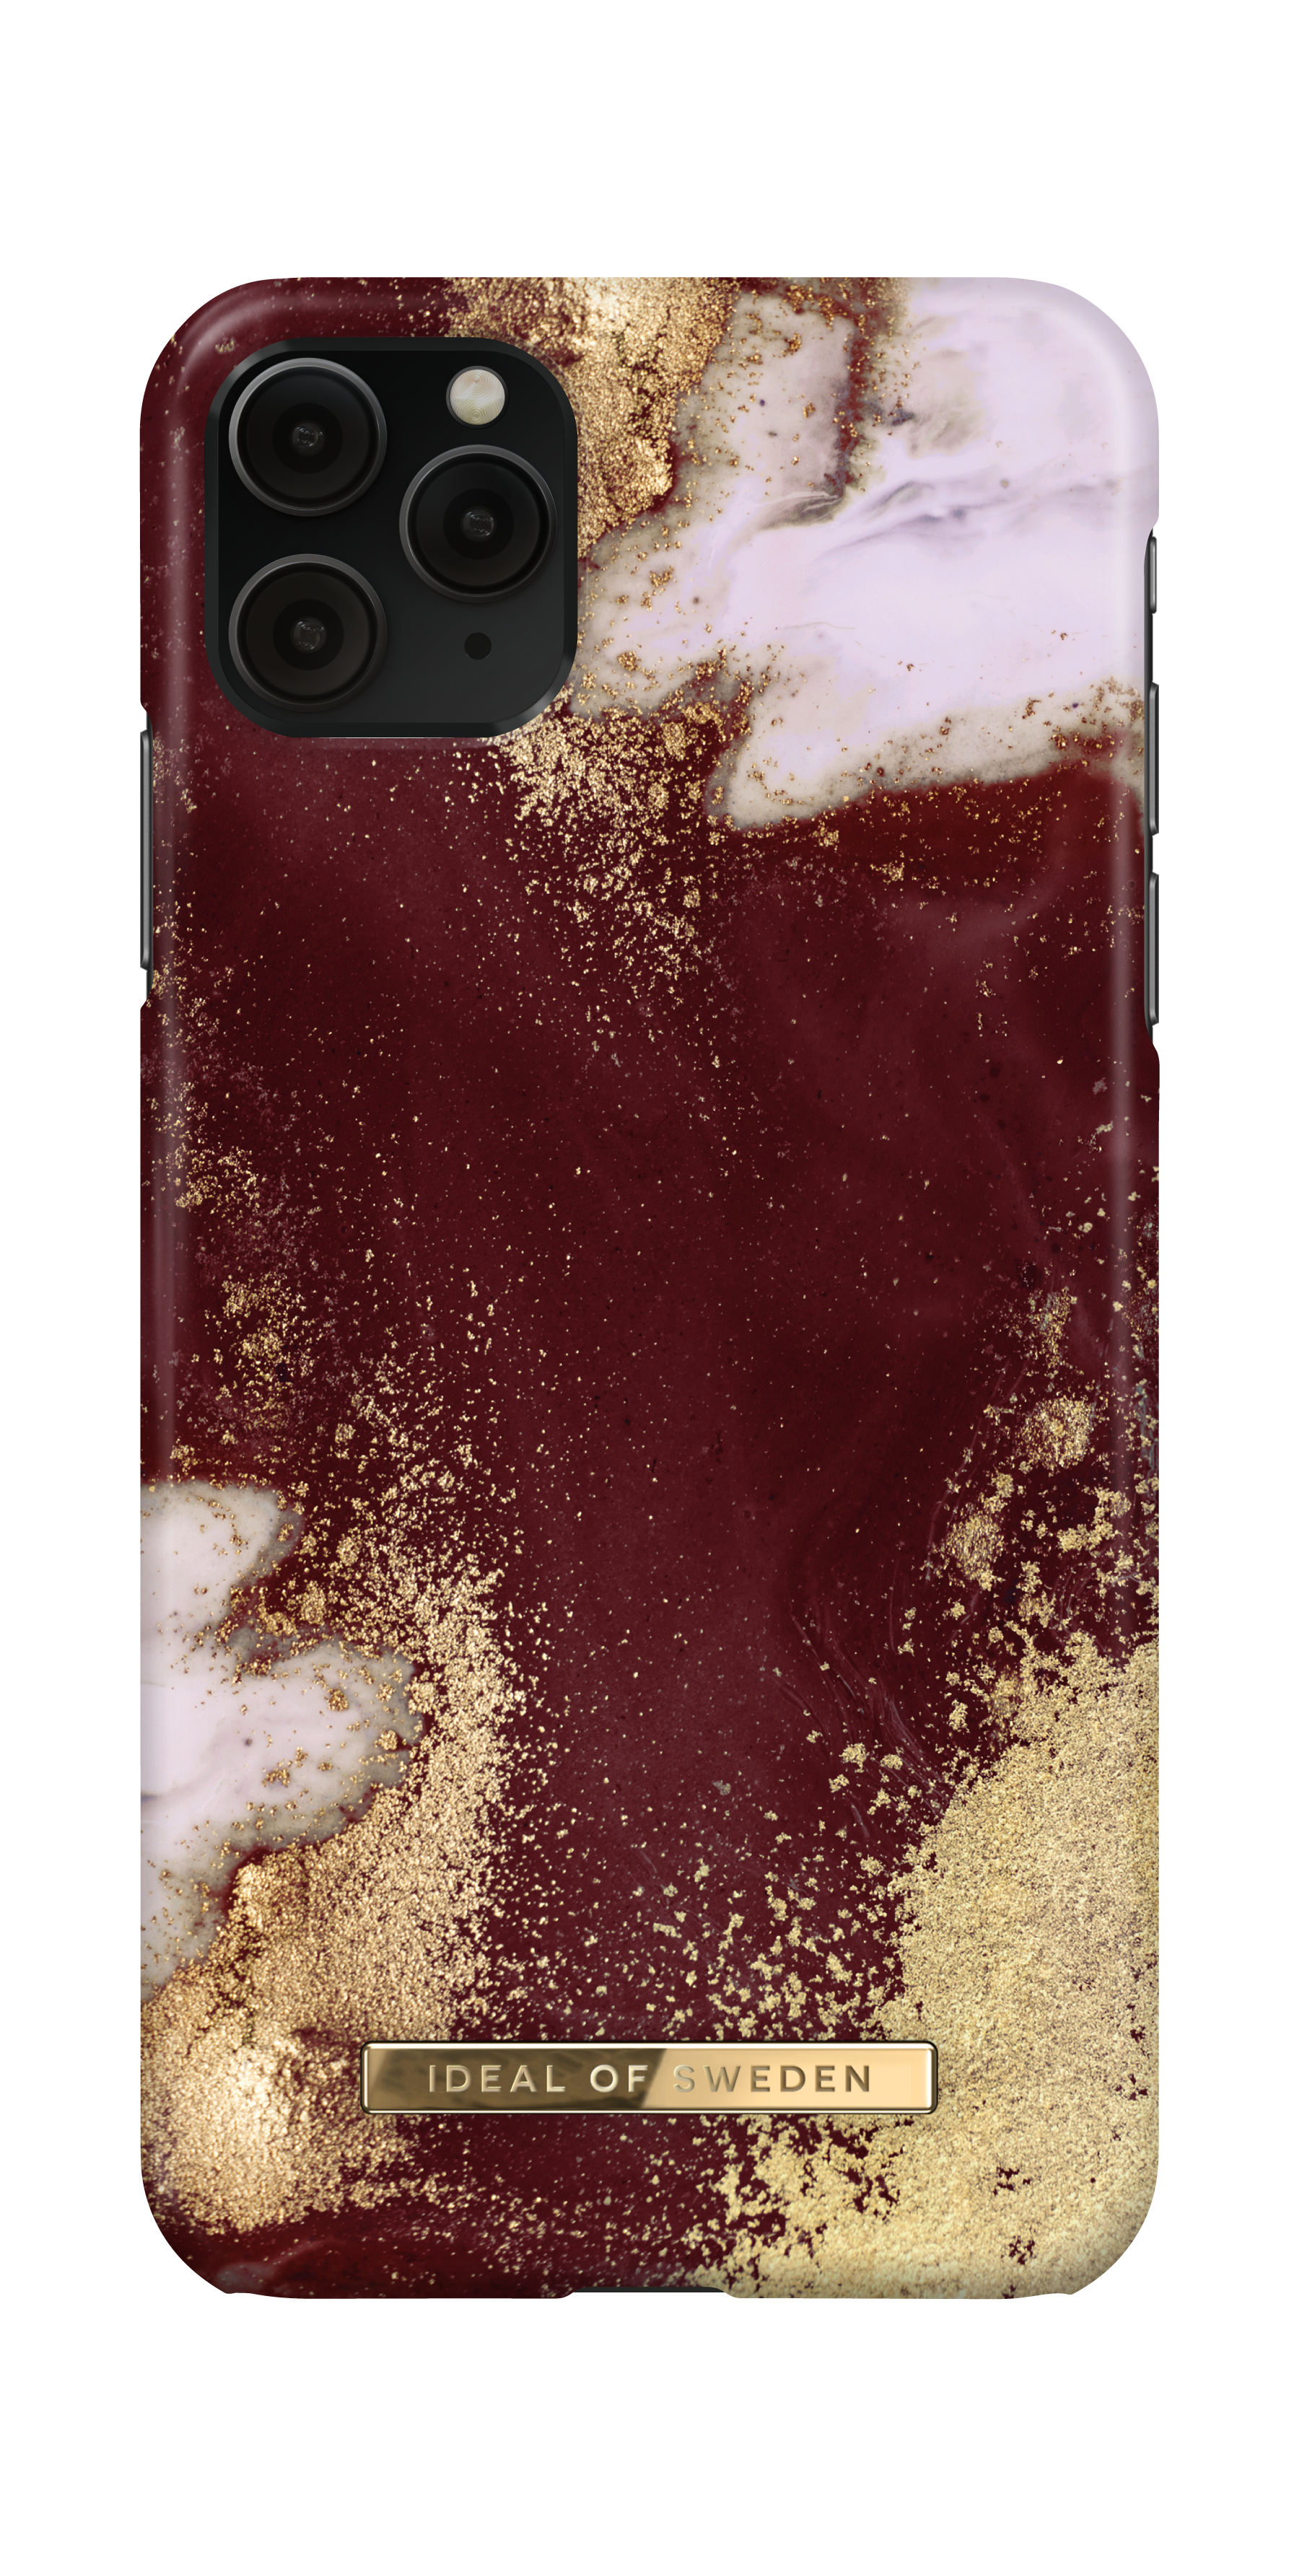 IDEAL OF Max, Golden Burgundy Marble iPhone SWEDEN IDFCAW19-I1965-149, Pro Backcover, XS 11 Max, iPhone Apple